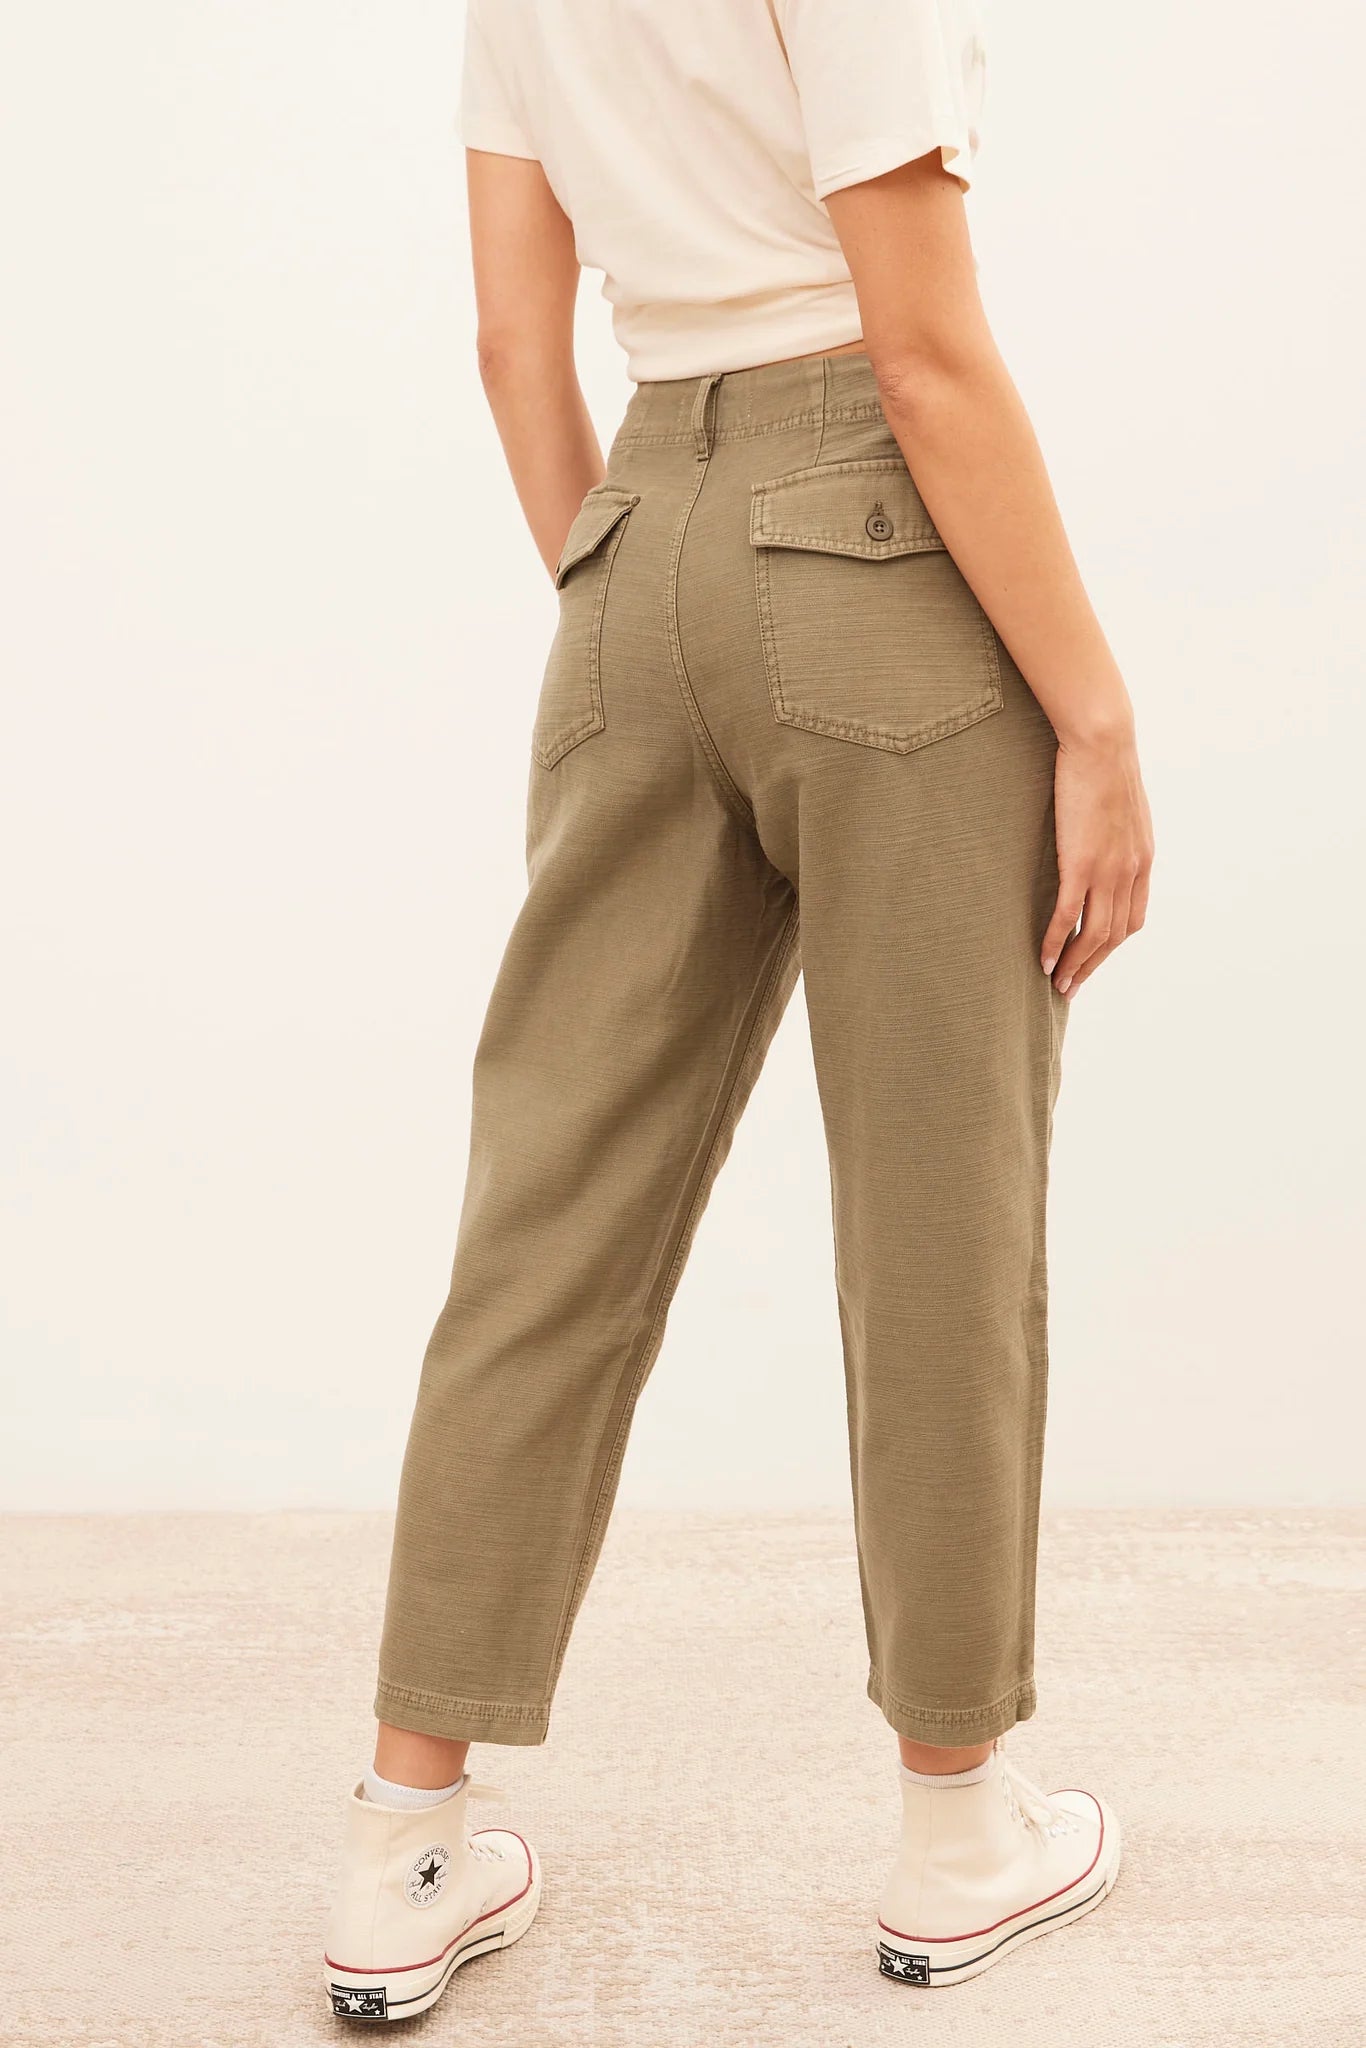 Pre-Loved, Lucky Brand Drop Crotch Military Pant